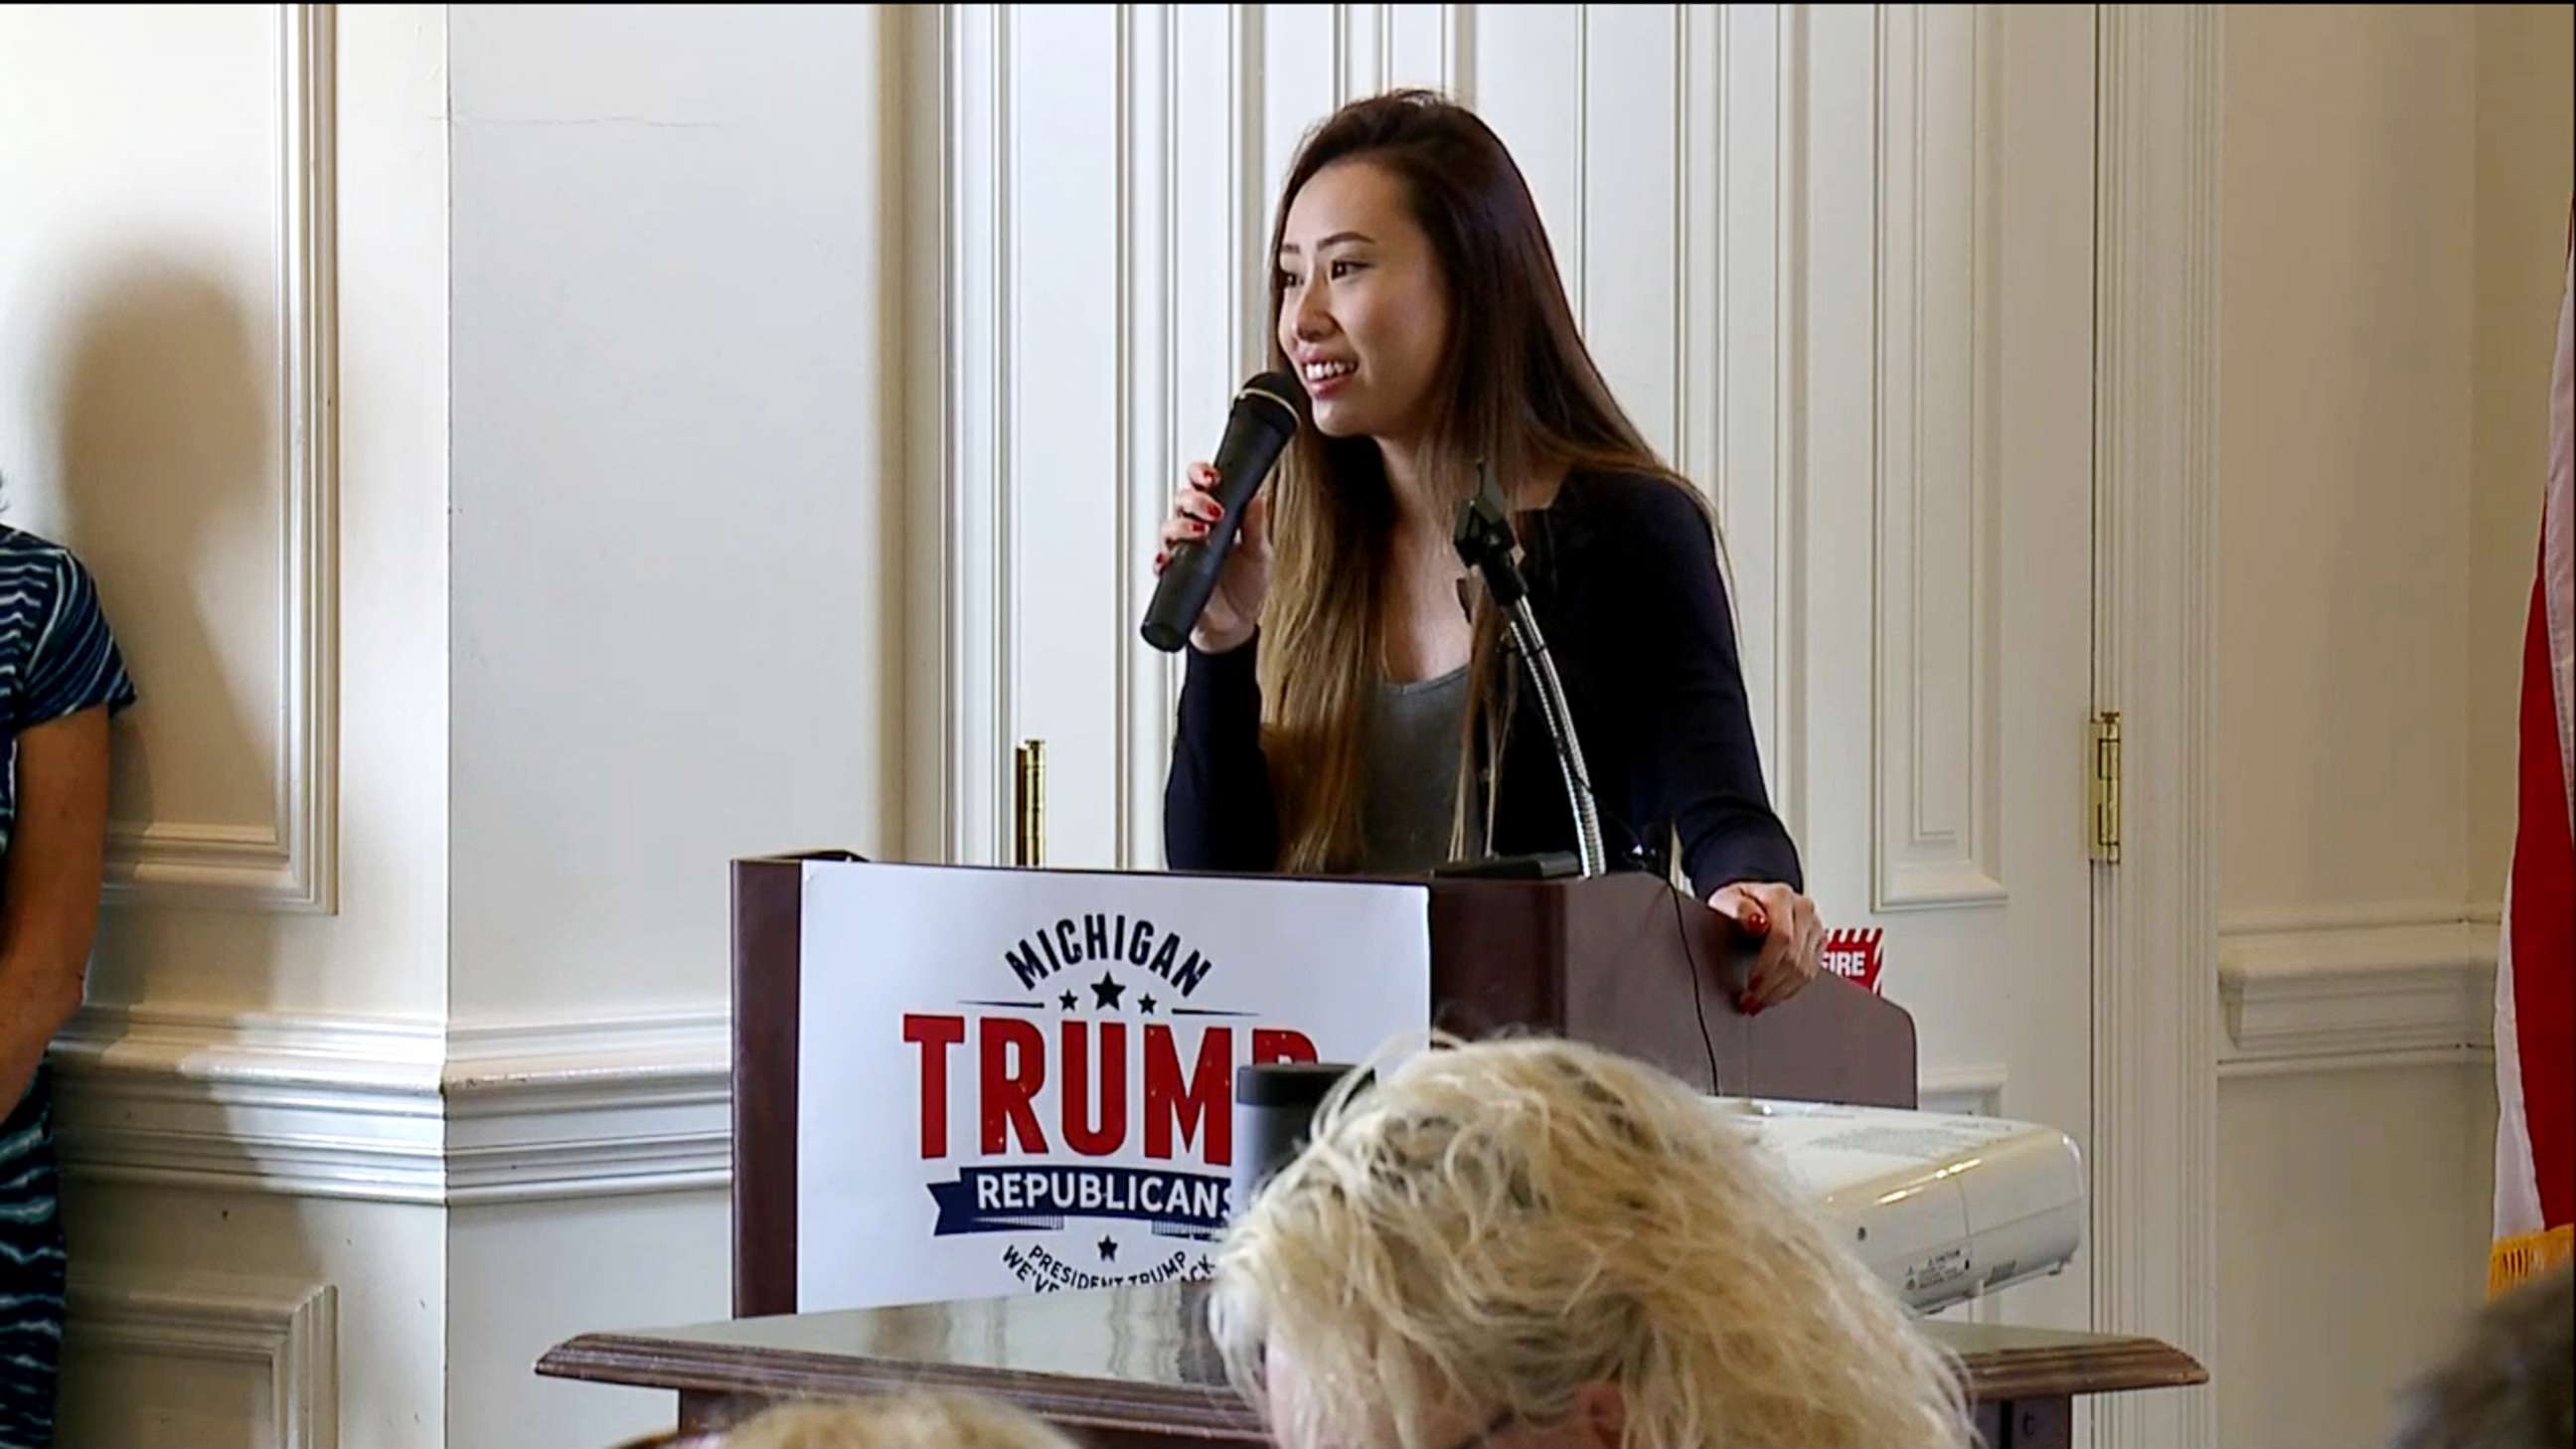 PHOTO: Kathy Zhu speaks at a Women for Trump event in Bloomfield Hills, Mich., July 26, 2019.